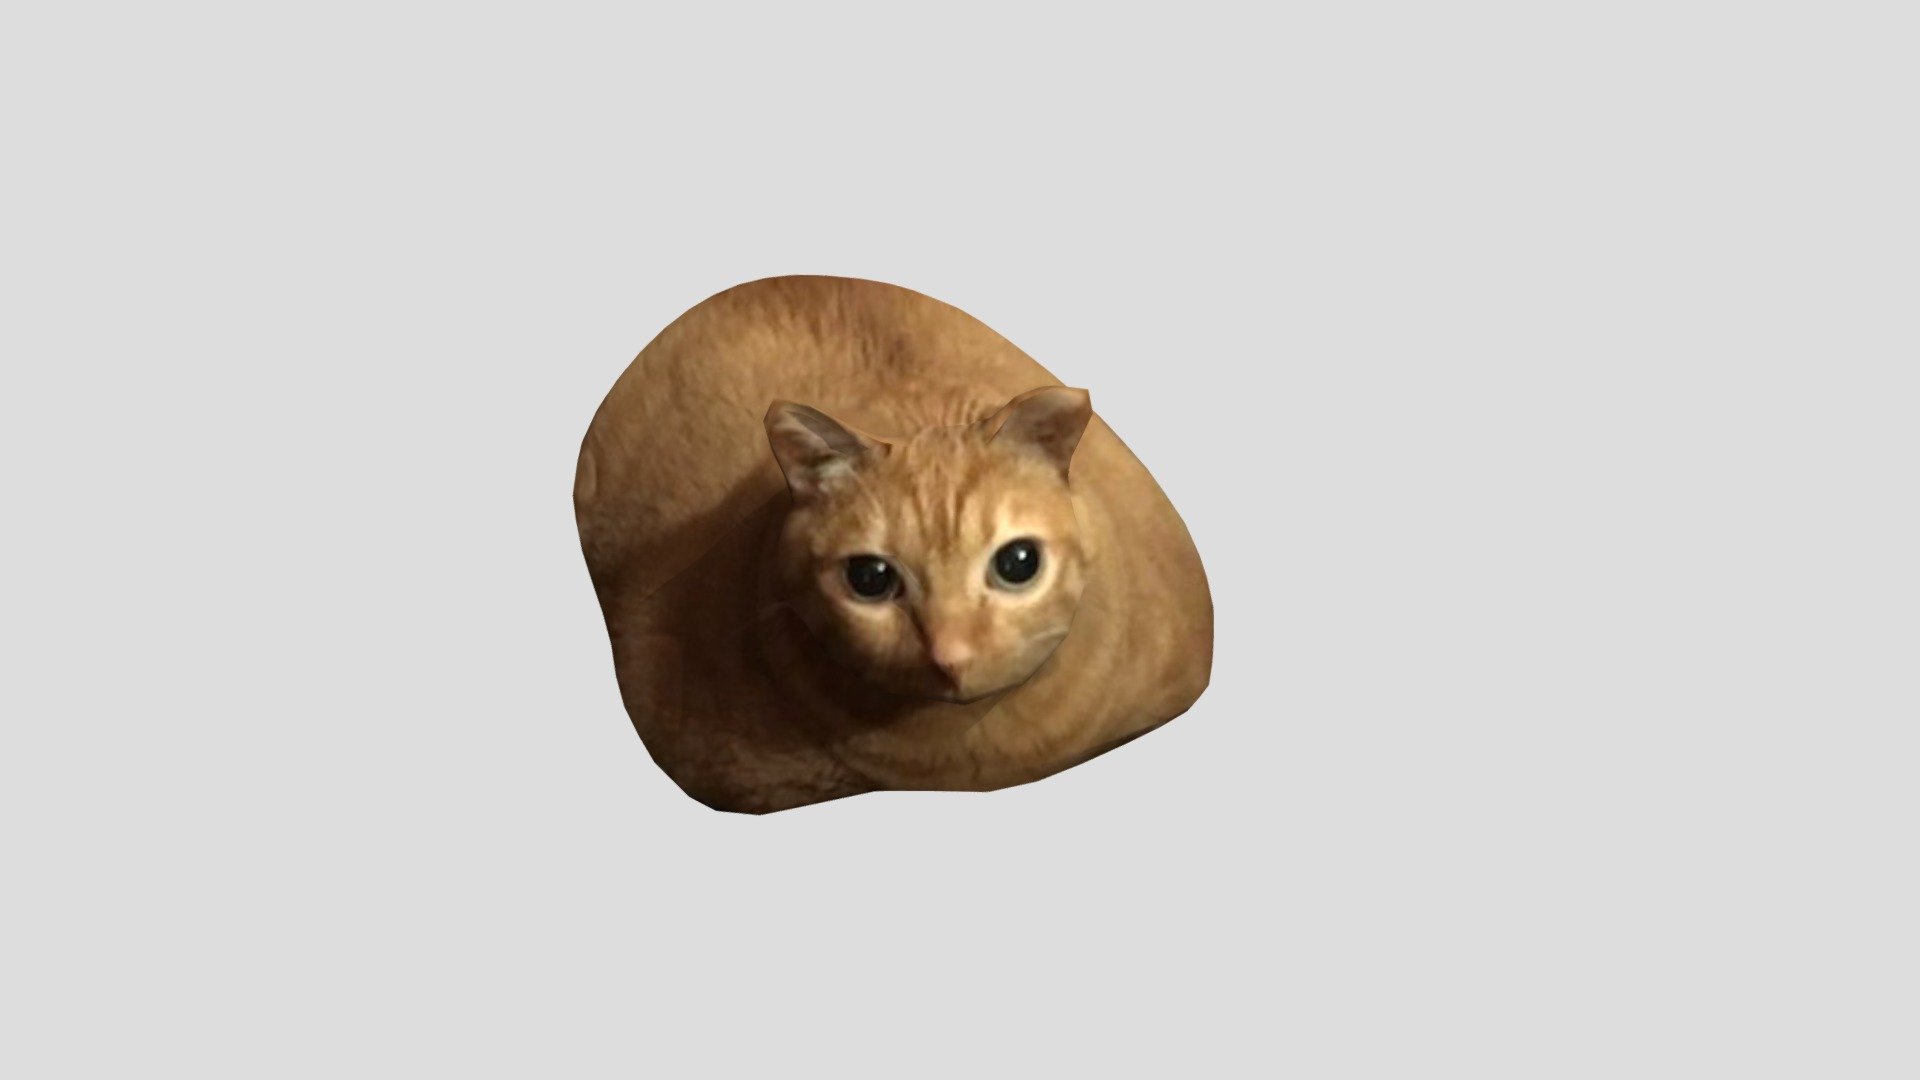 garfield you fat cat you are so big and fat why are you so fat

vid about making this on youtube: https://youtu.be/2zk9UDkNHKc

upd: shoutout to Pablo The Race Cat - THE CHONKER (gwa gwa cat) - Download Free 3D model by bean(alwayshasbean) (@alwayshasbean) 3d model